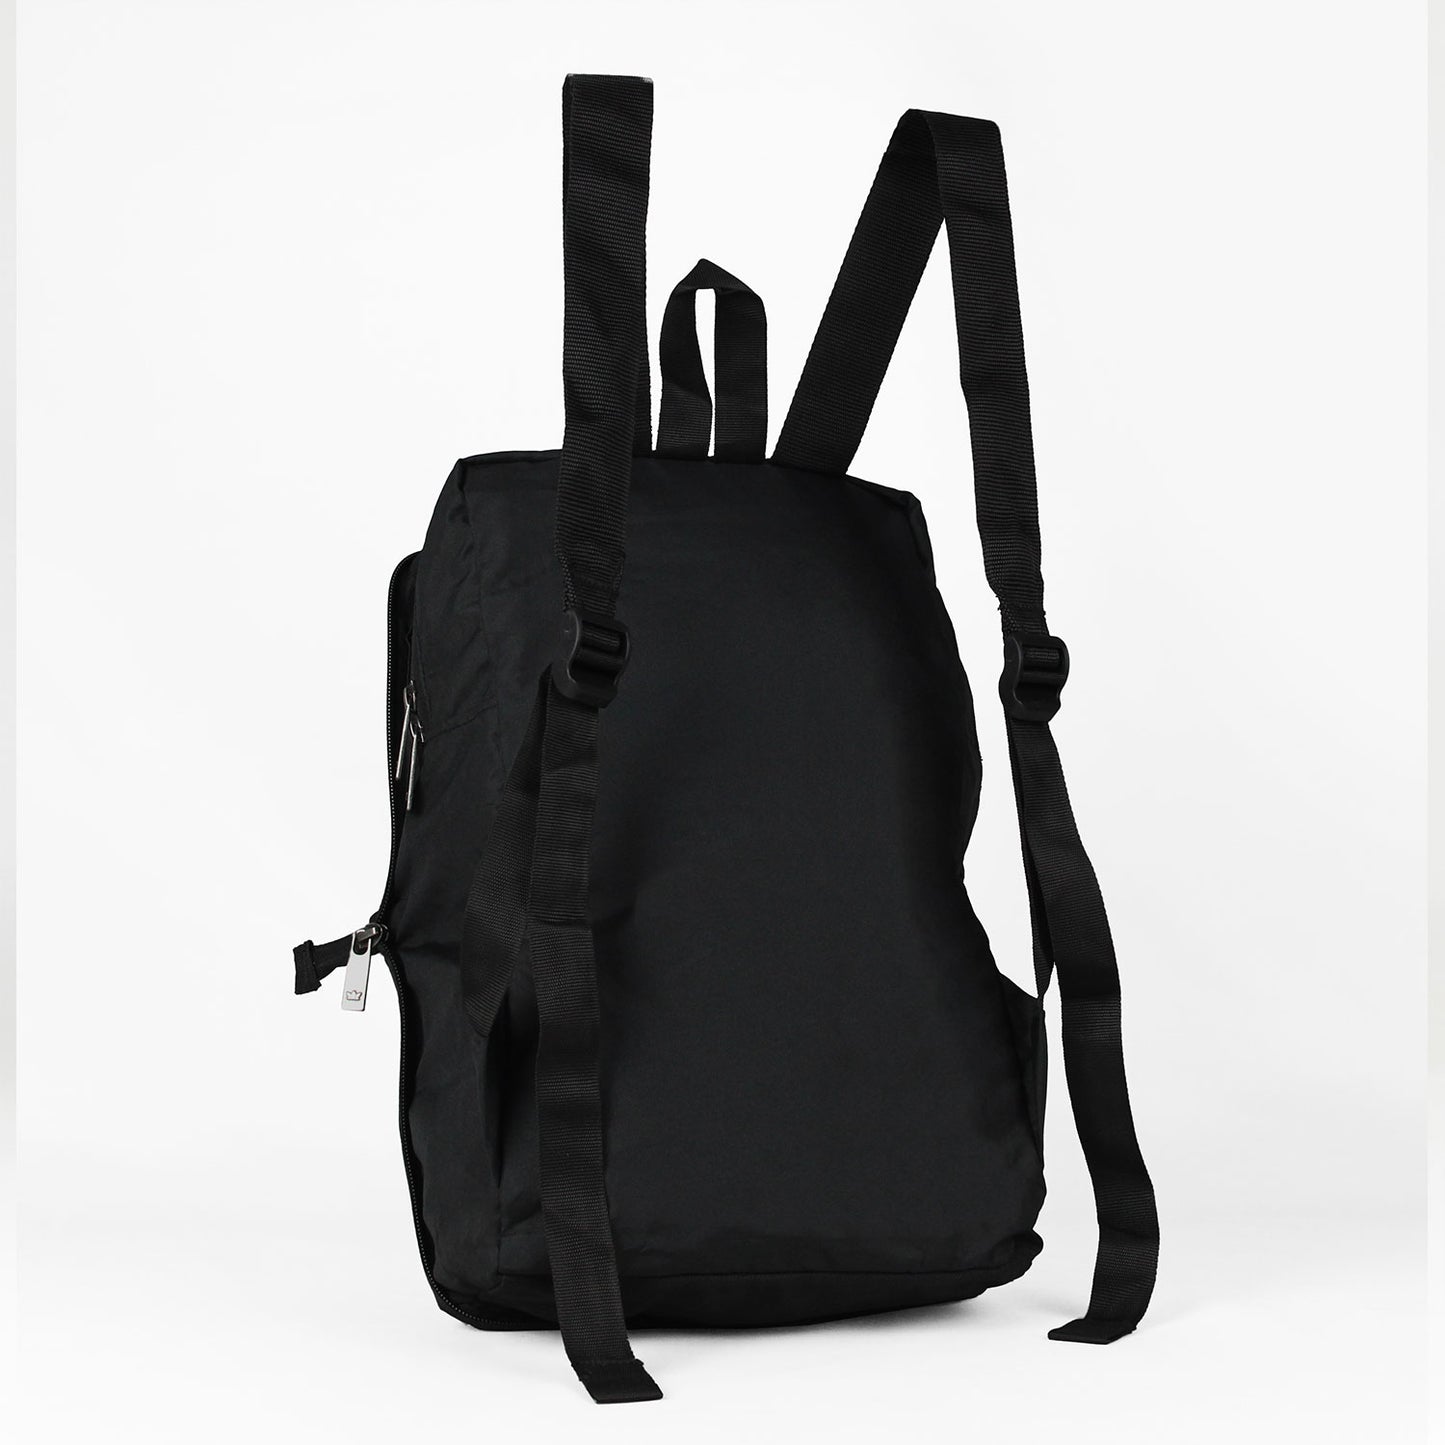 Crypto Packable Backpack and Sling Bag